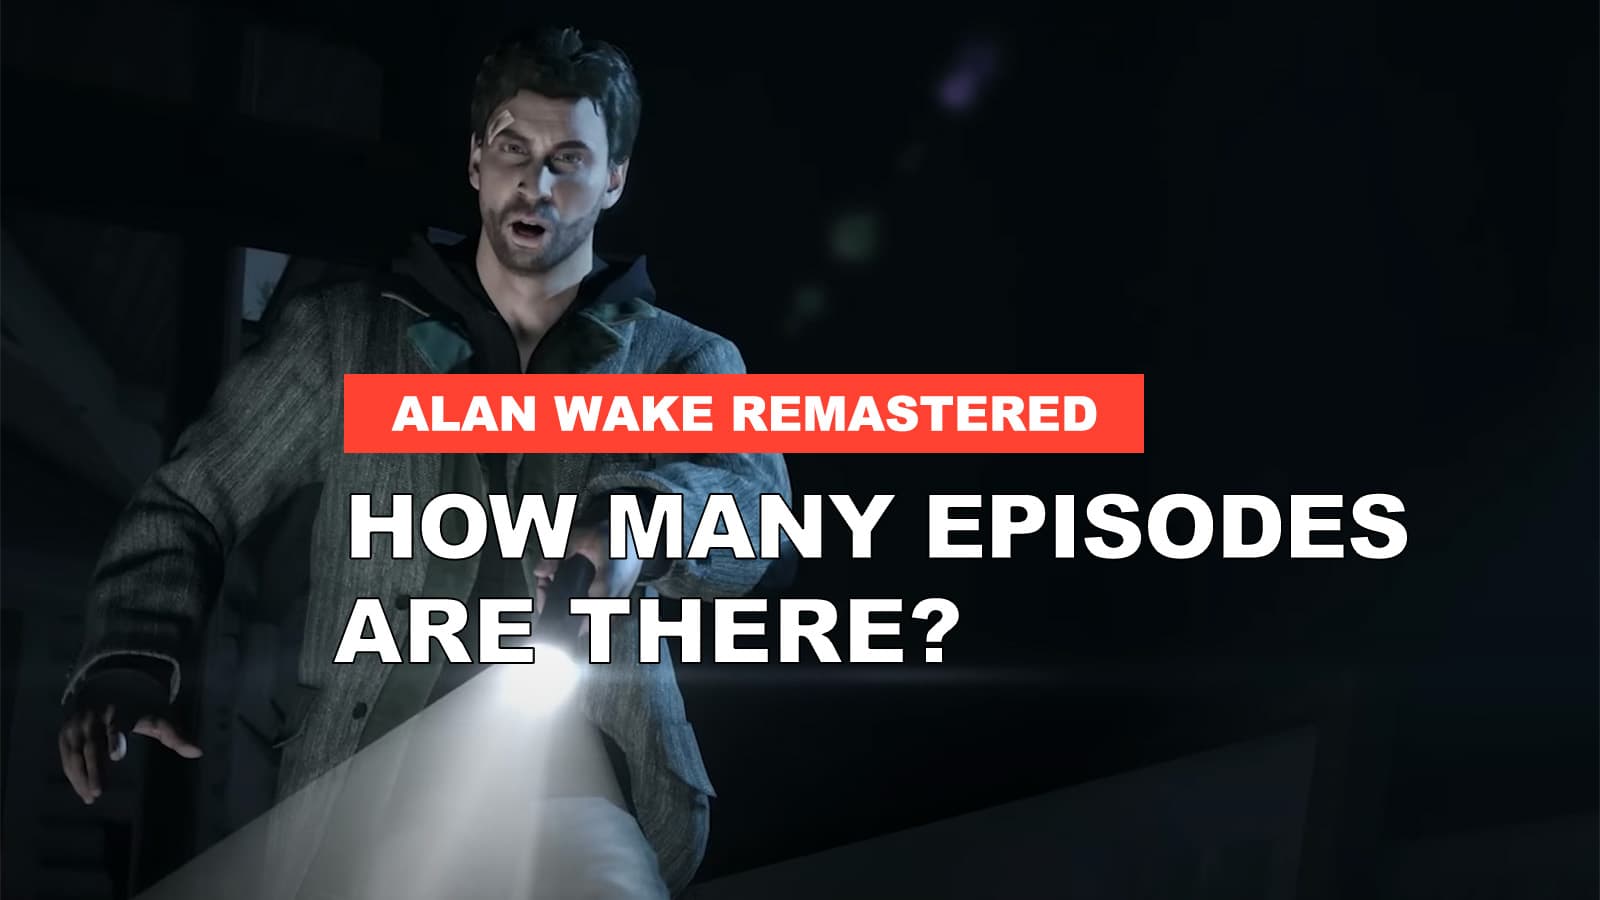 Alan Wake Remastered Episode List – How Many Are There?